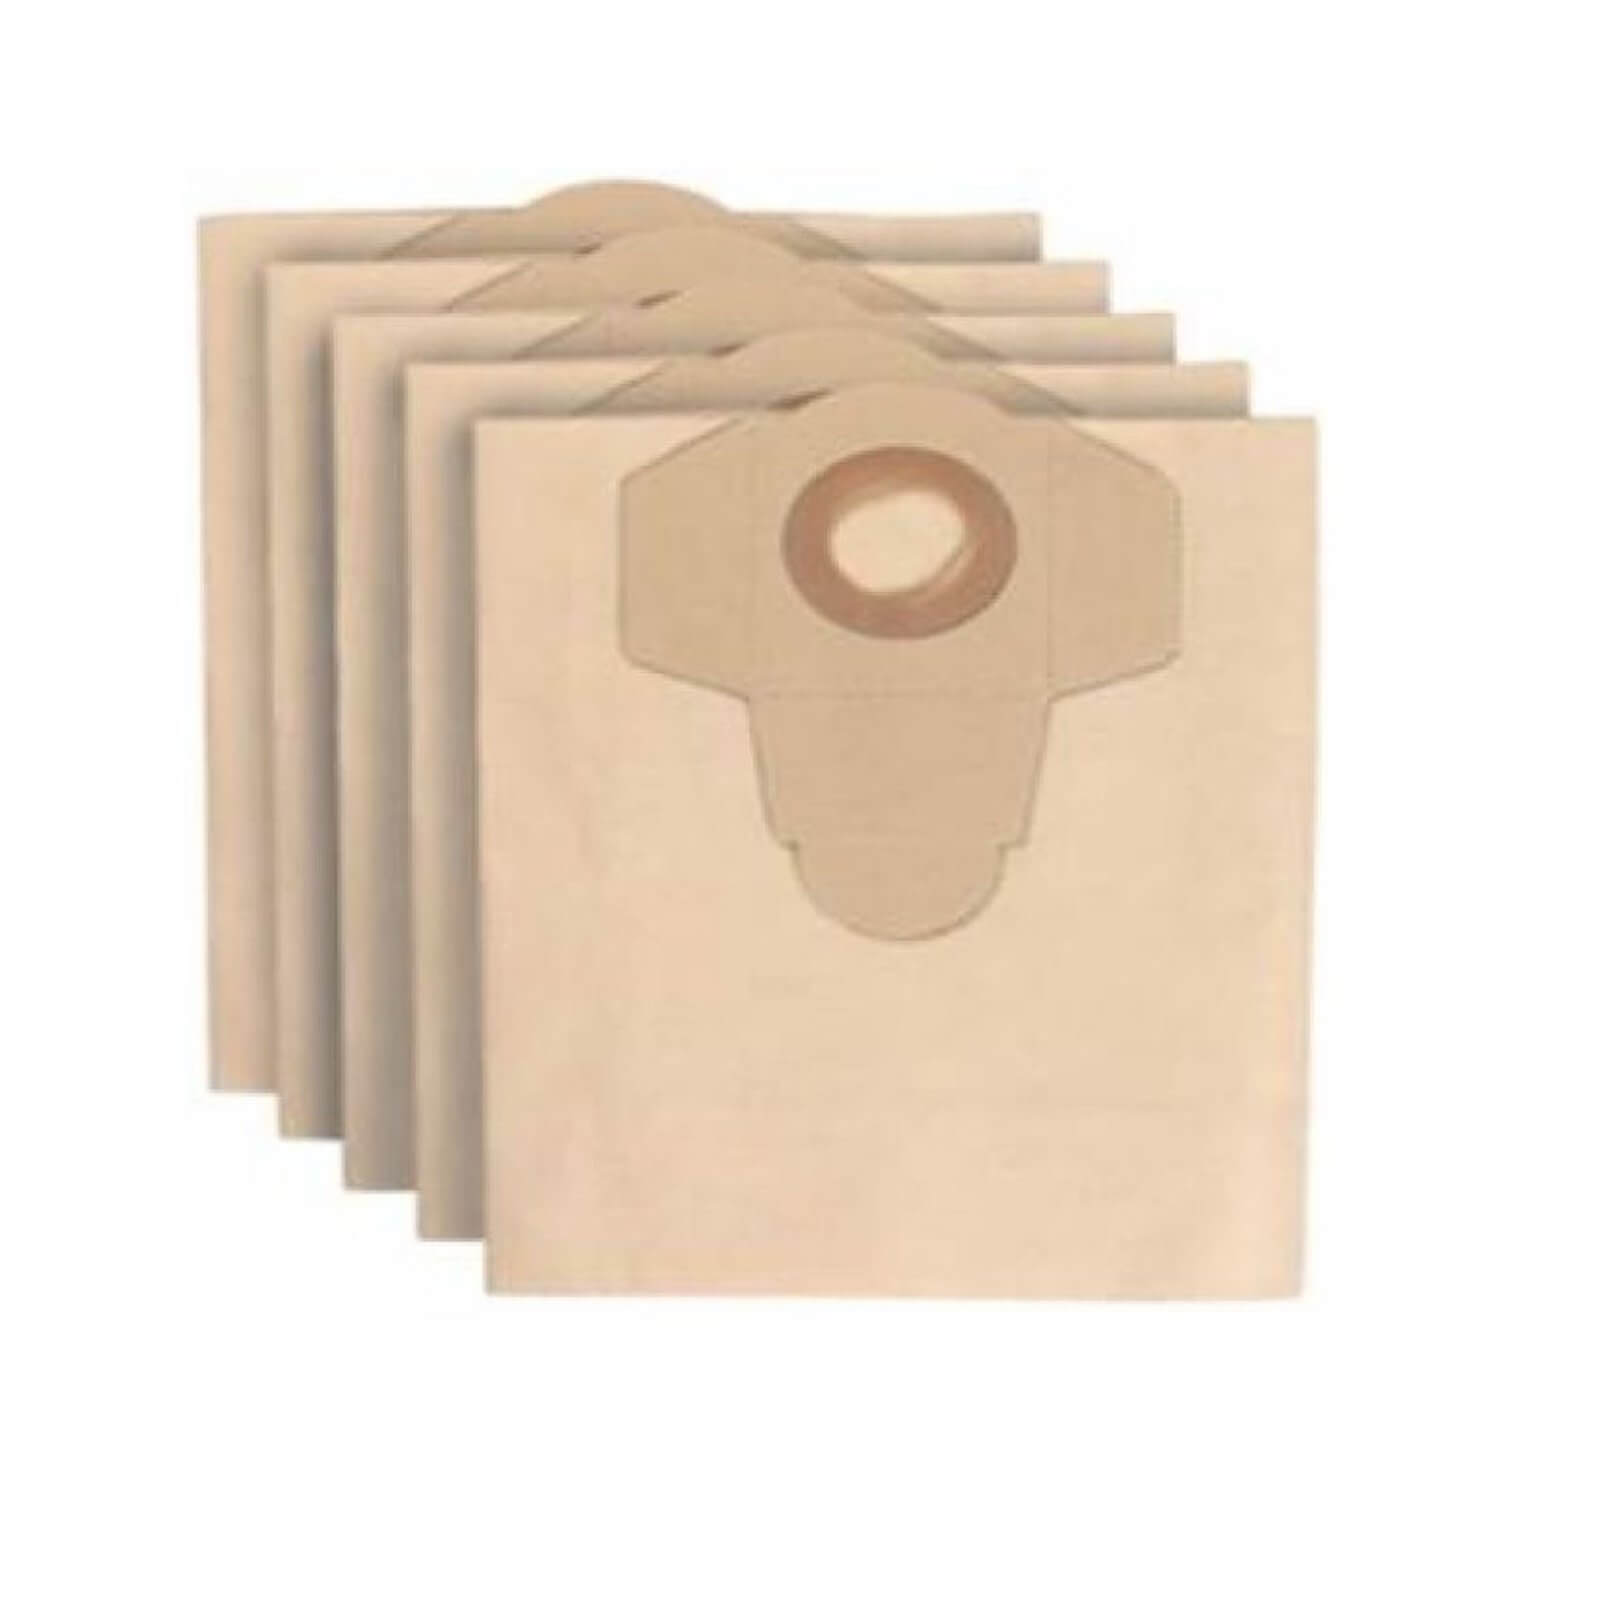 Ozito by Einhell 20L Replacement Vacuum Bags - 5 Pack